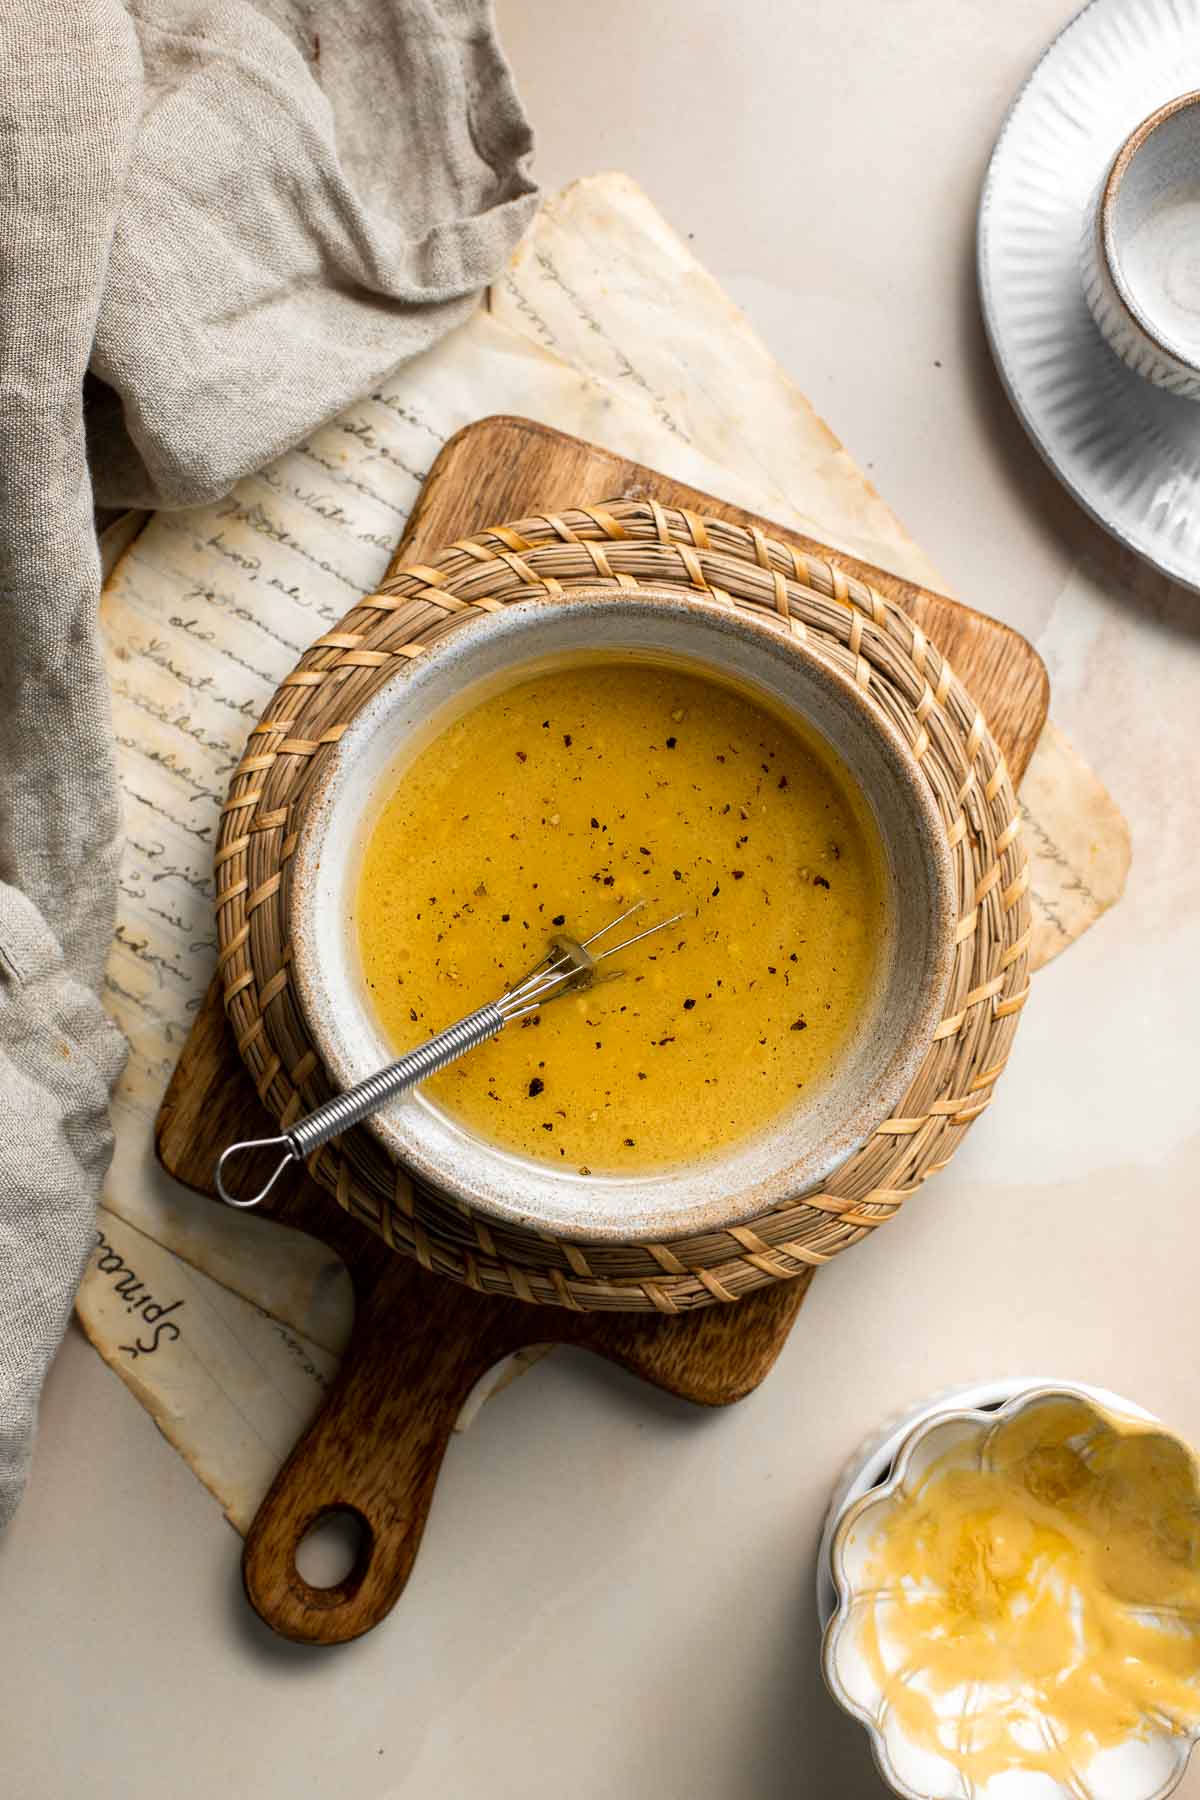 Honey mustard dressing is a sweet and tangy sauce that adds flavor to salads, sandwiches, meats, and more. Make it in minutes with a few simple ingredients. | aheadofthyme.com